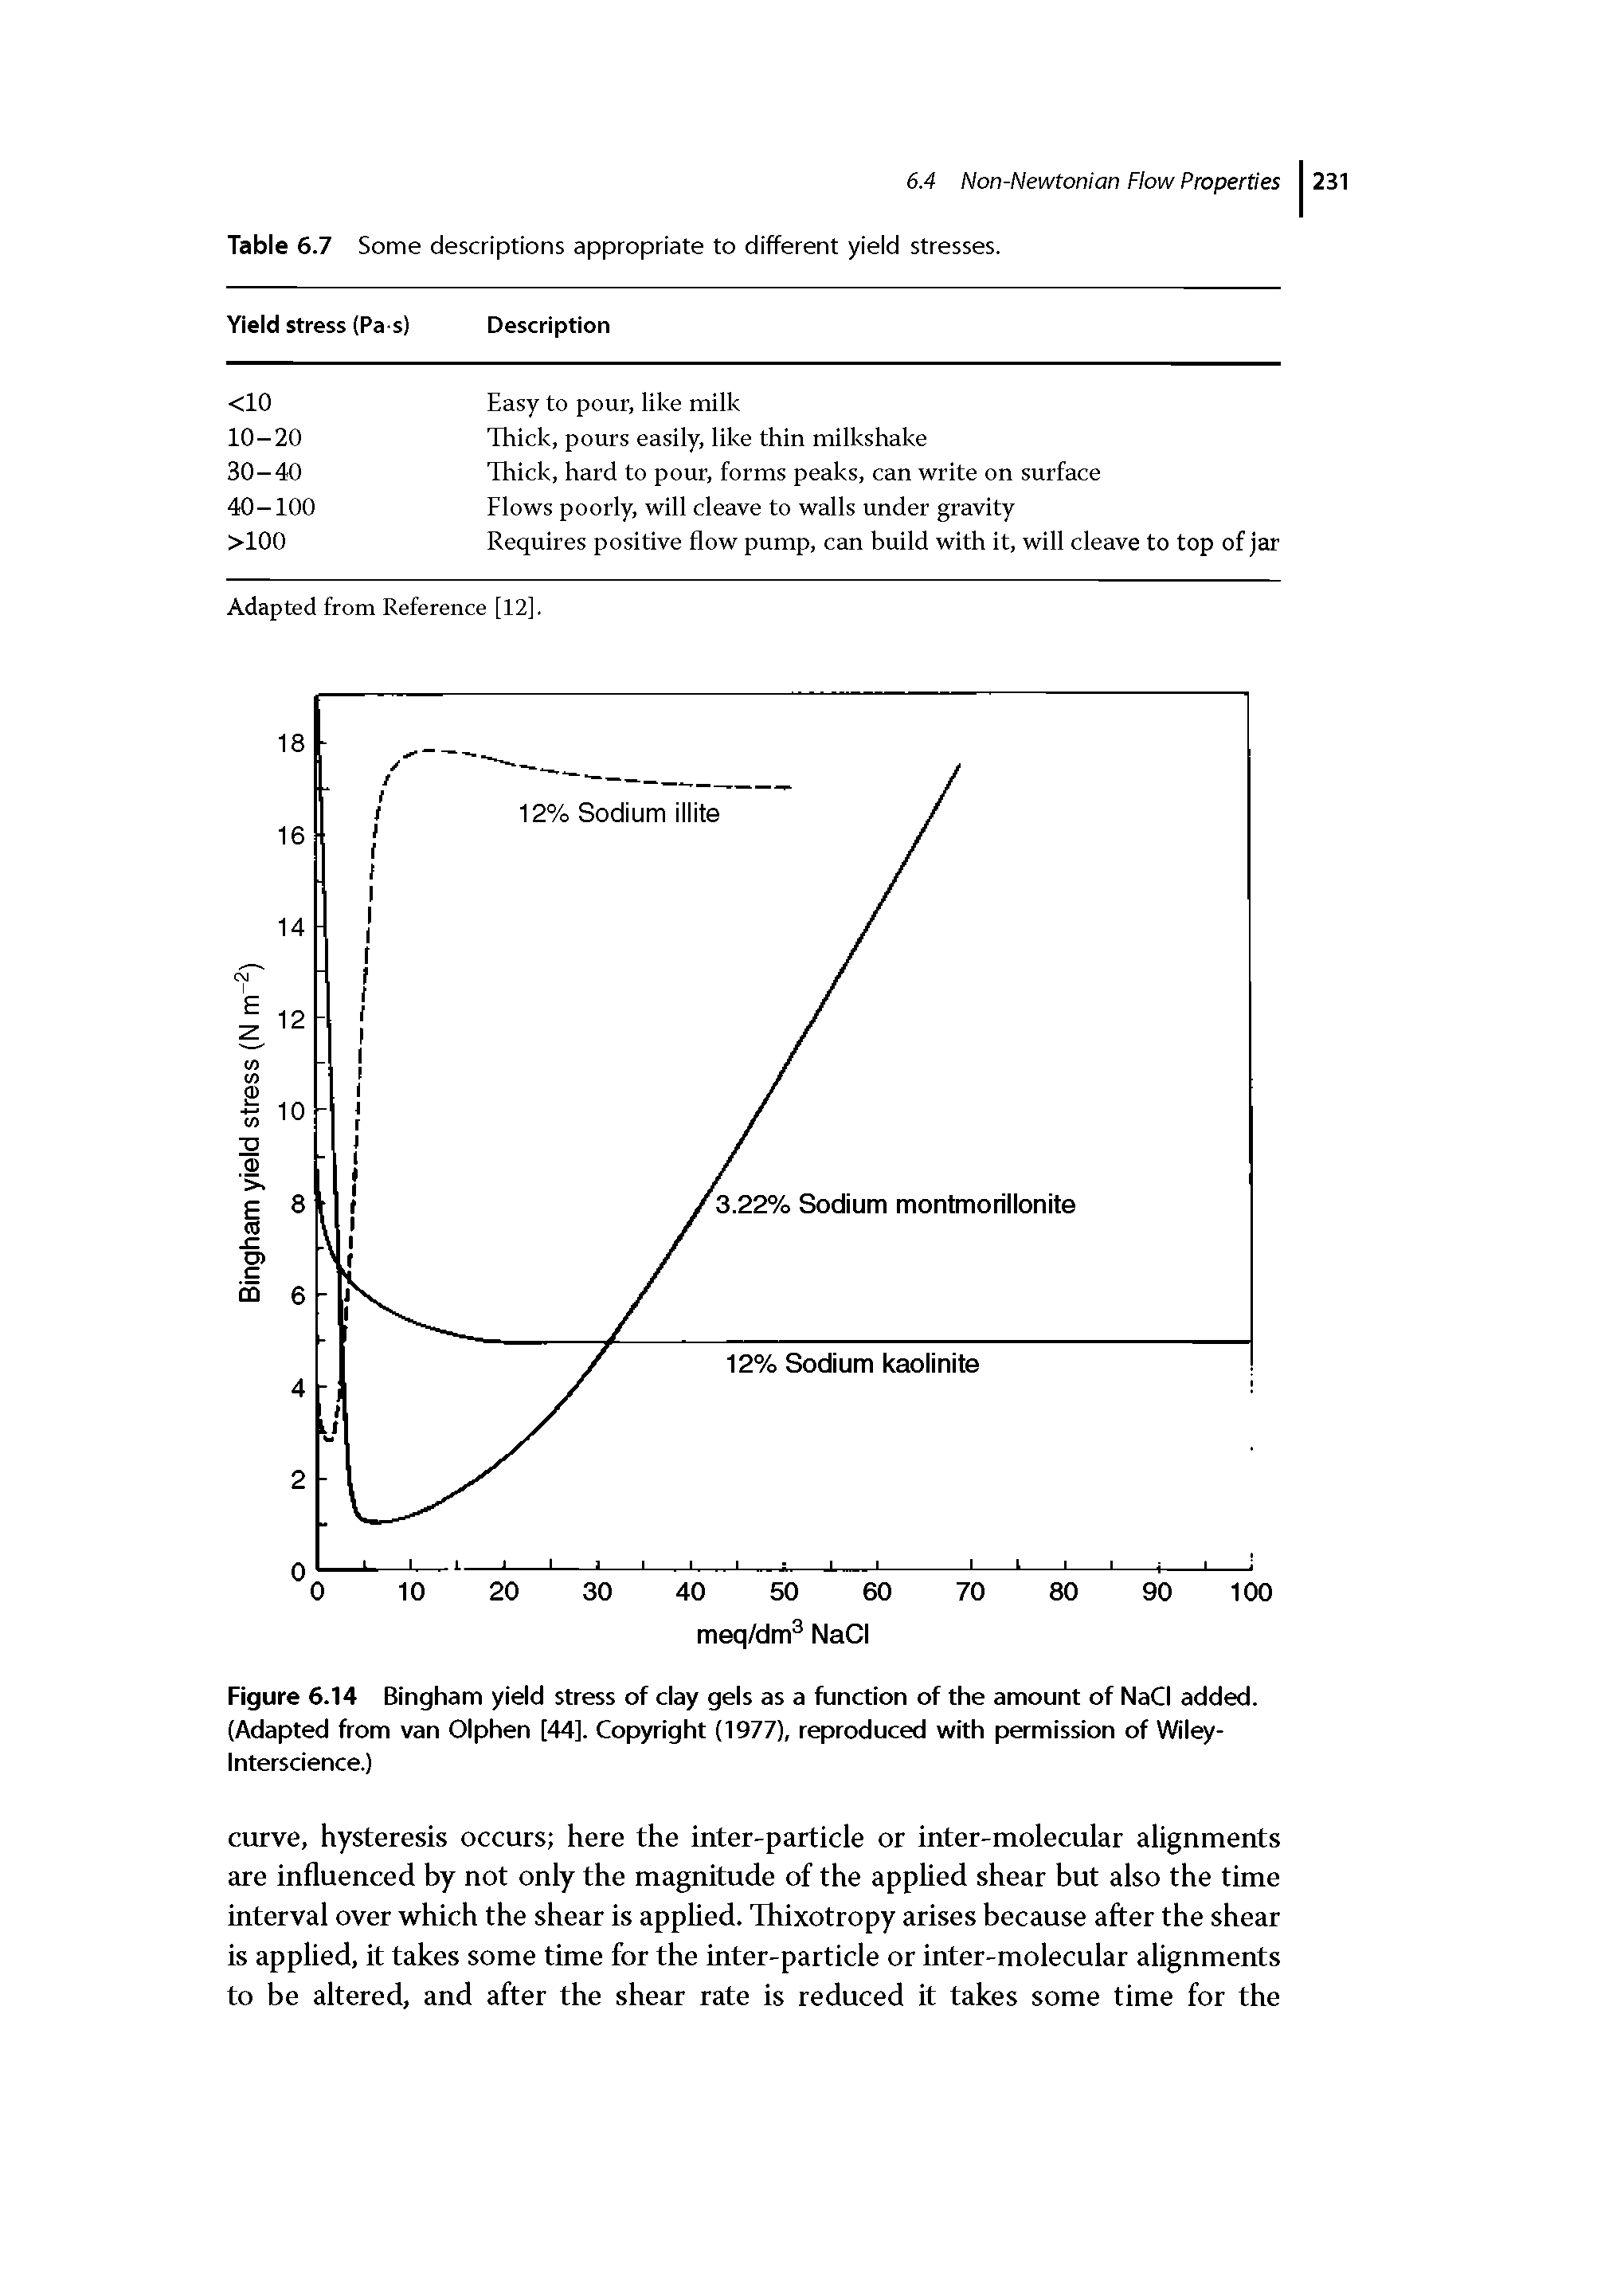 Figure 6.14 Bingham yield stress of clay gels as a function of the amount of NaCi added. (Adapted from van Olphen [44]. Copyright (1977), reproduced with permission of Wiiey-Interscience.)...